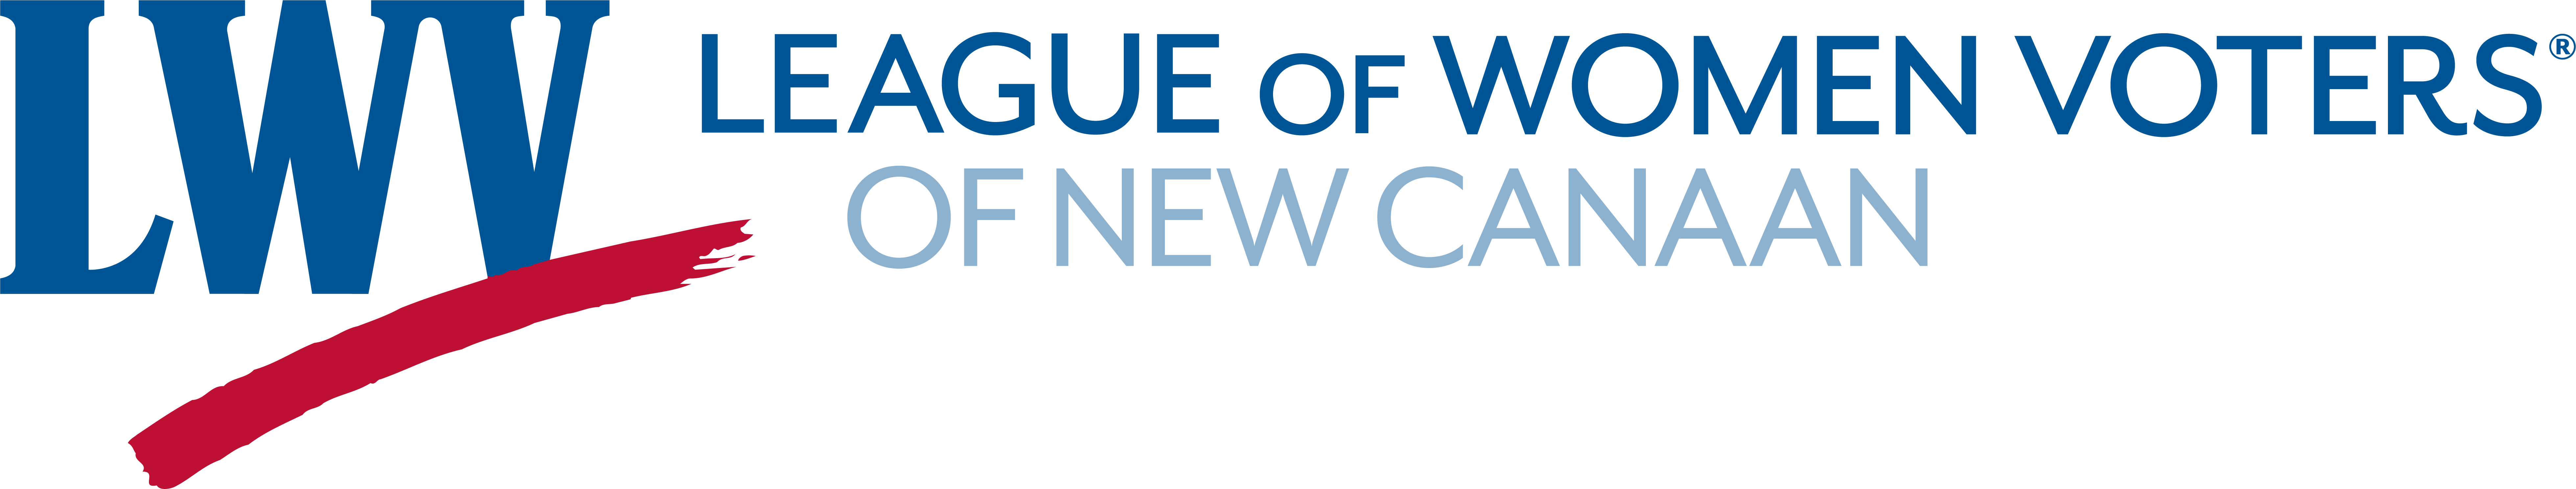 League of Women Voters of New Canaan logo